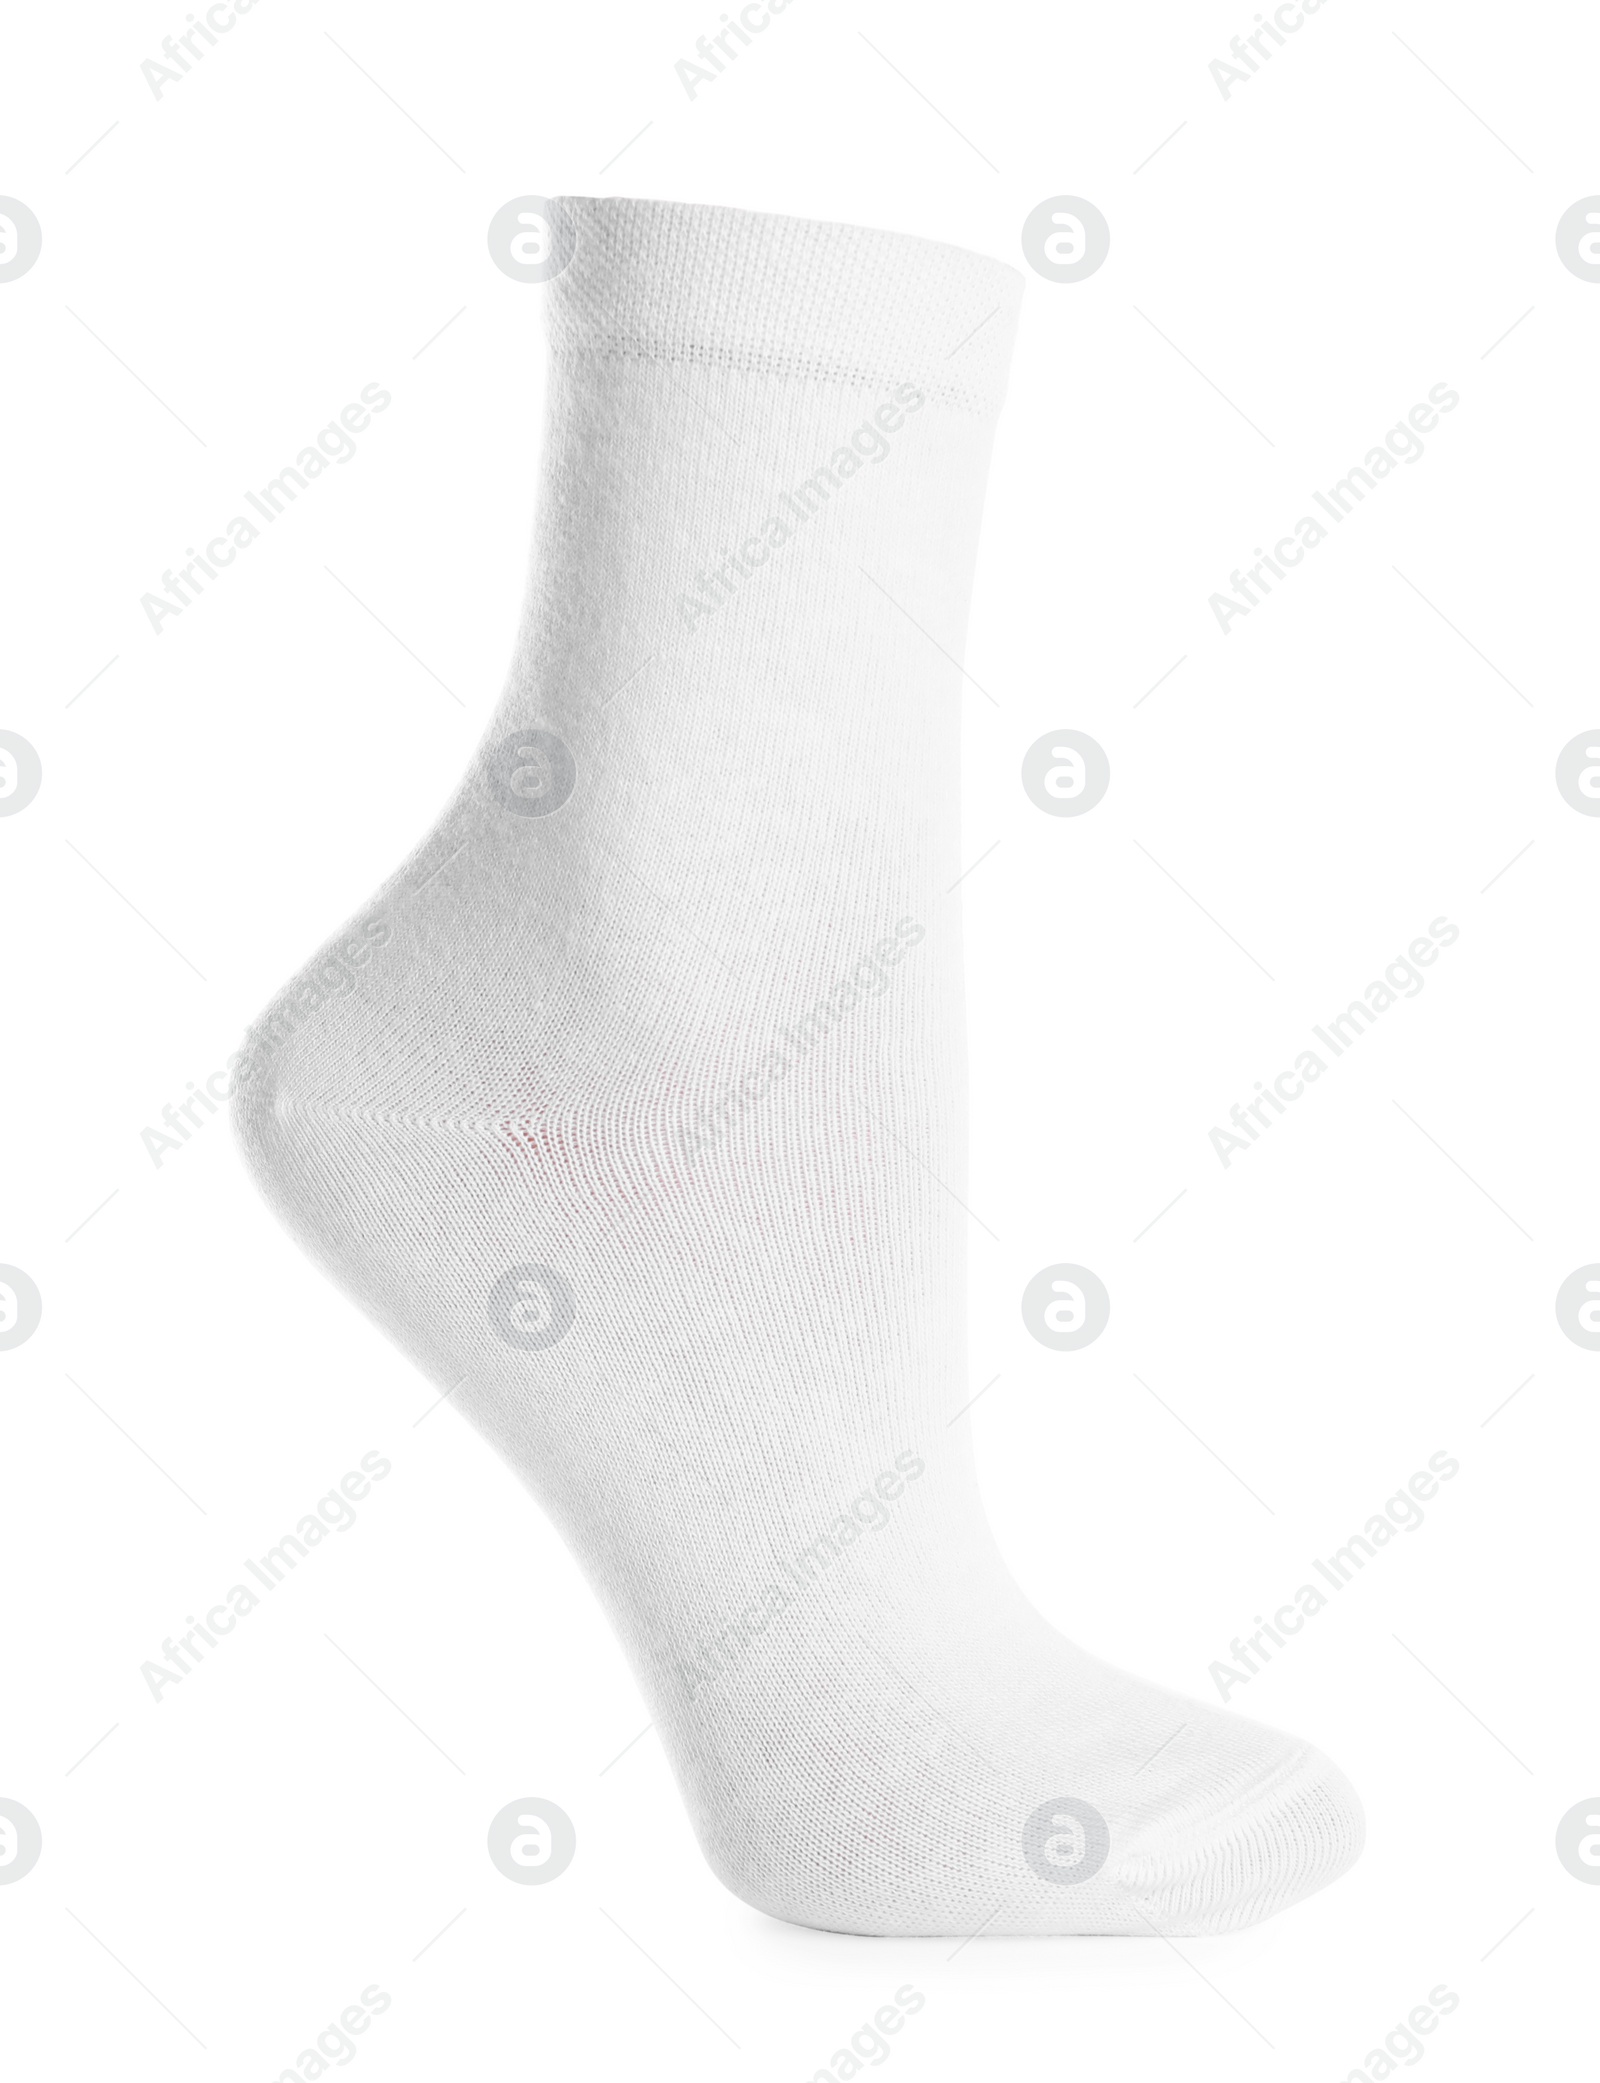 Photo of One stylish clean sock isolated on white